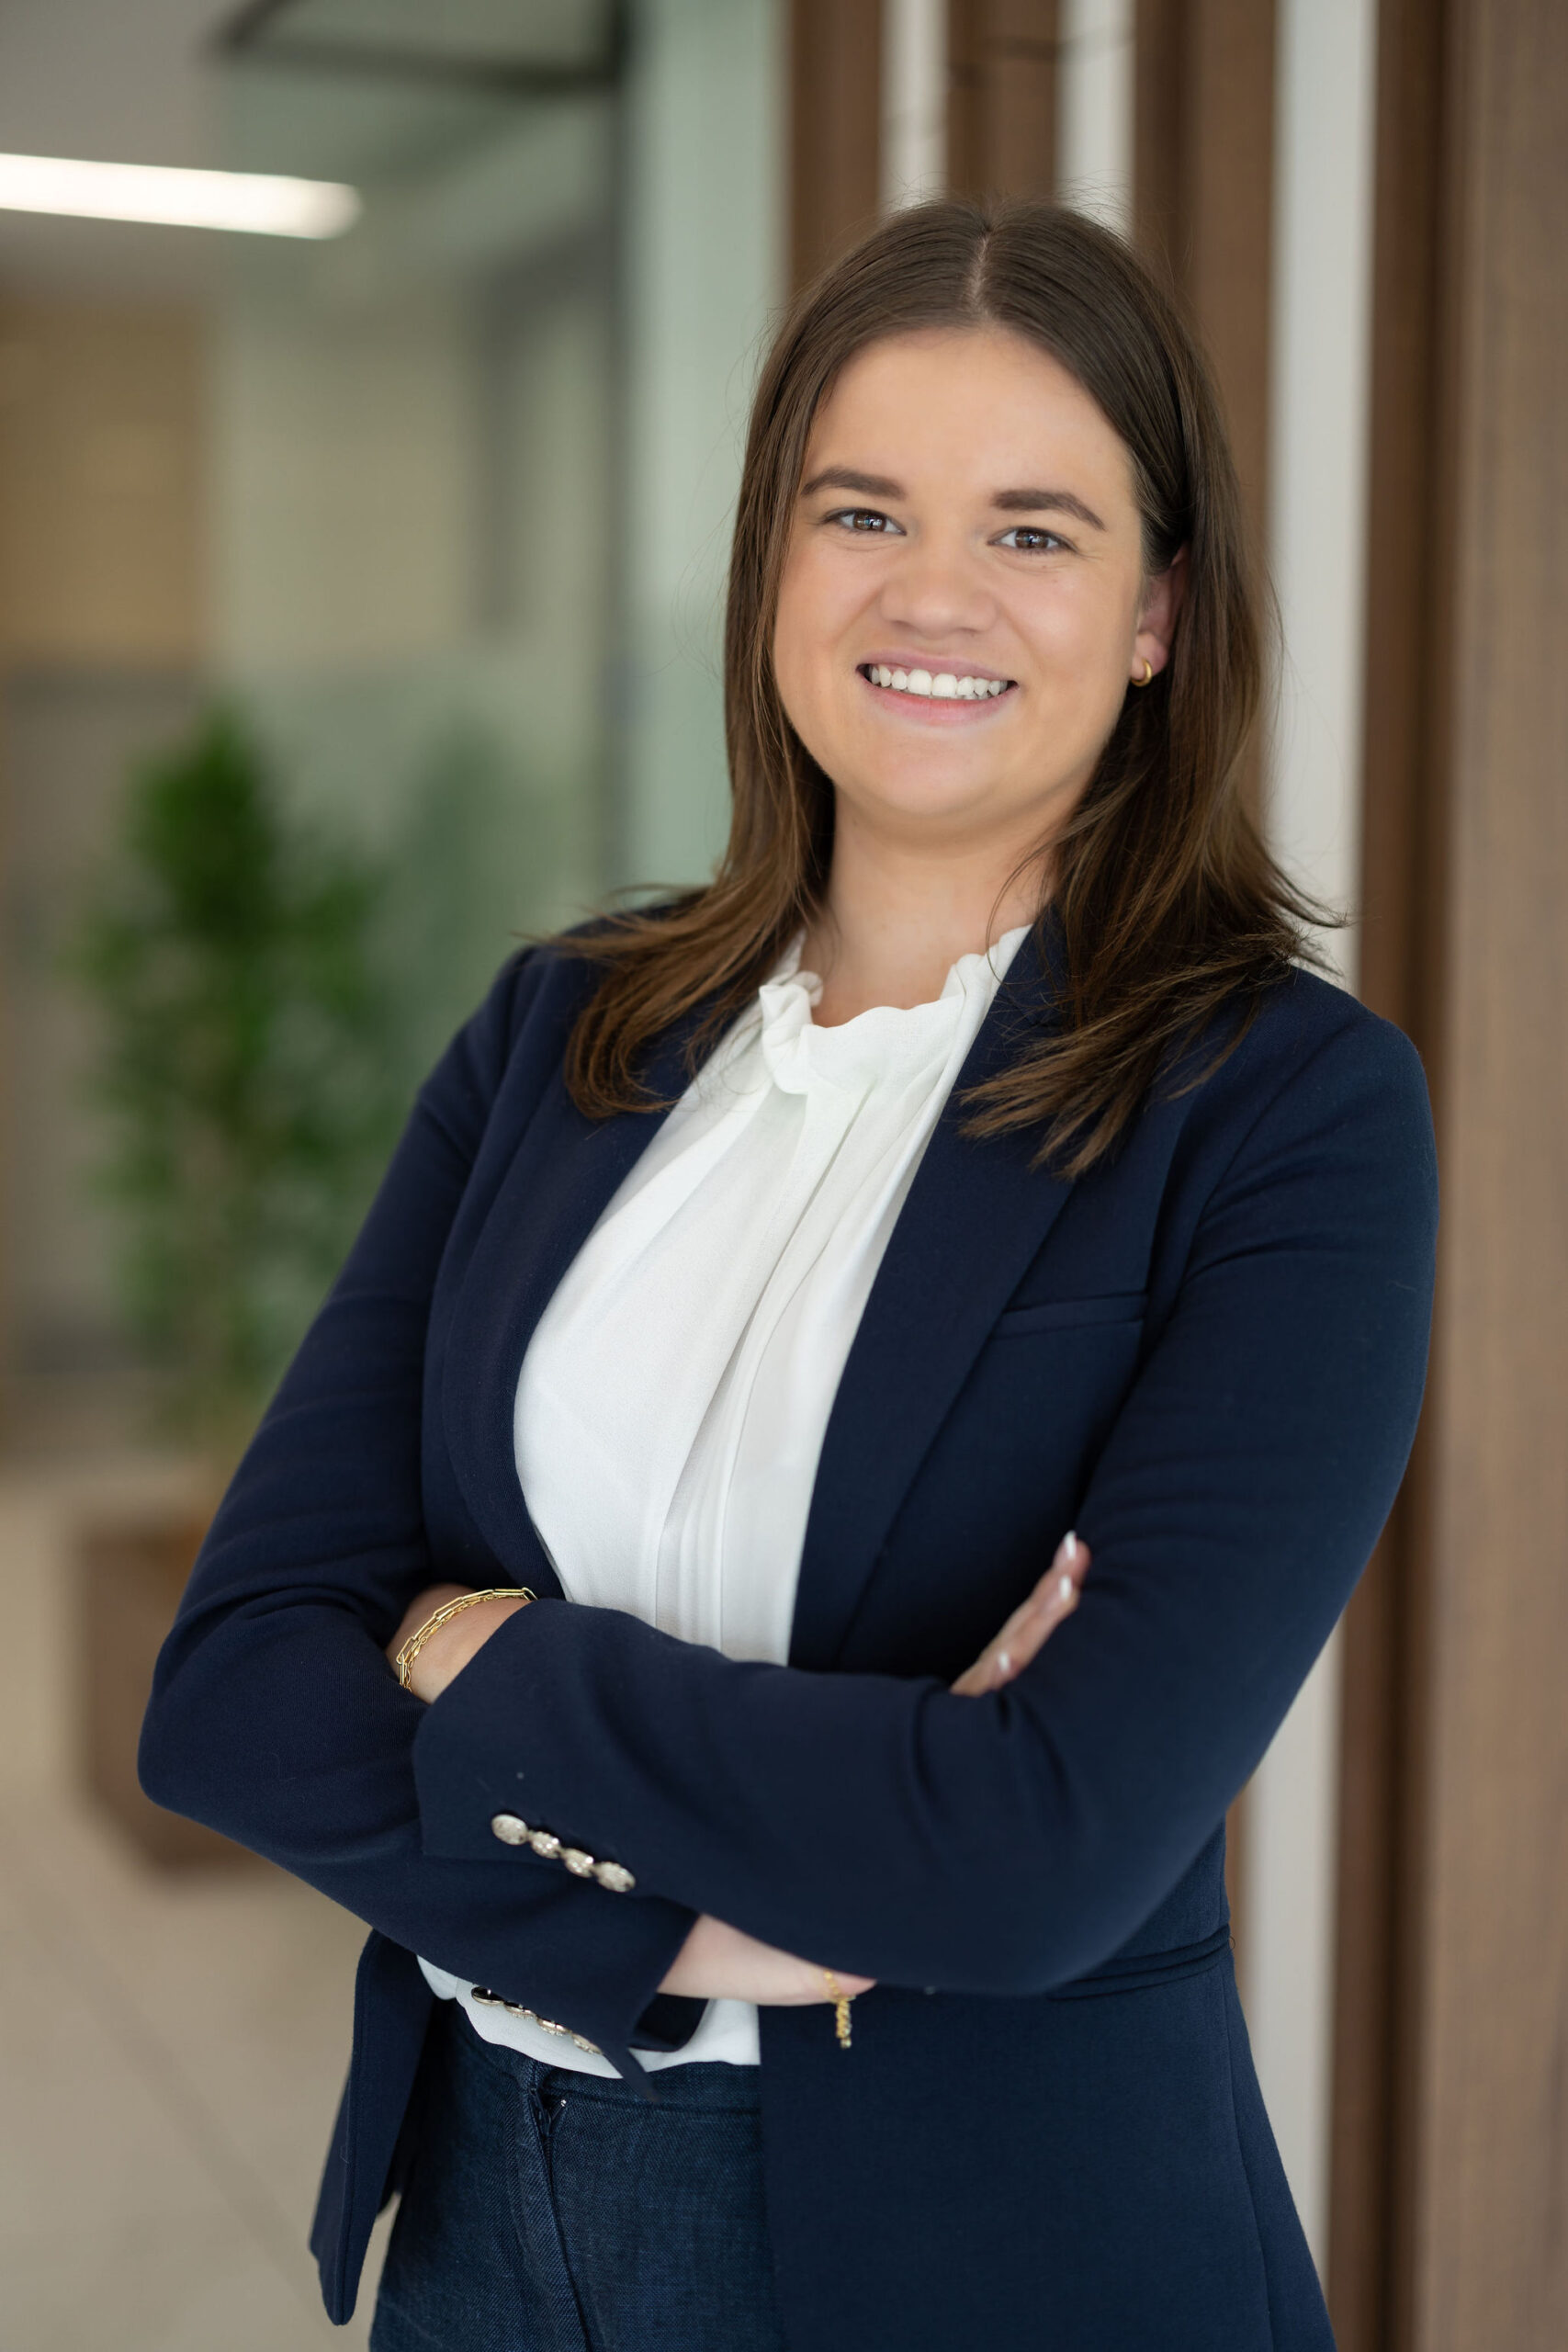 Charlotte McClintock, Law Clerk at McTaggart Grant Lawyers